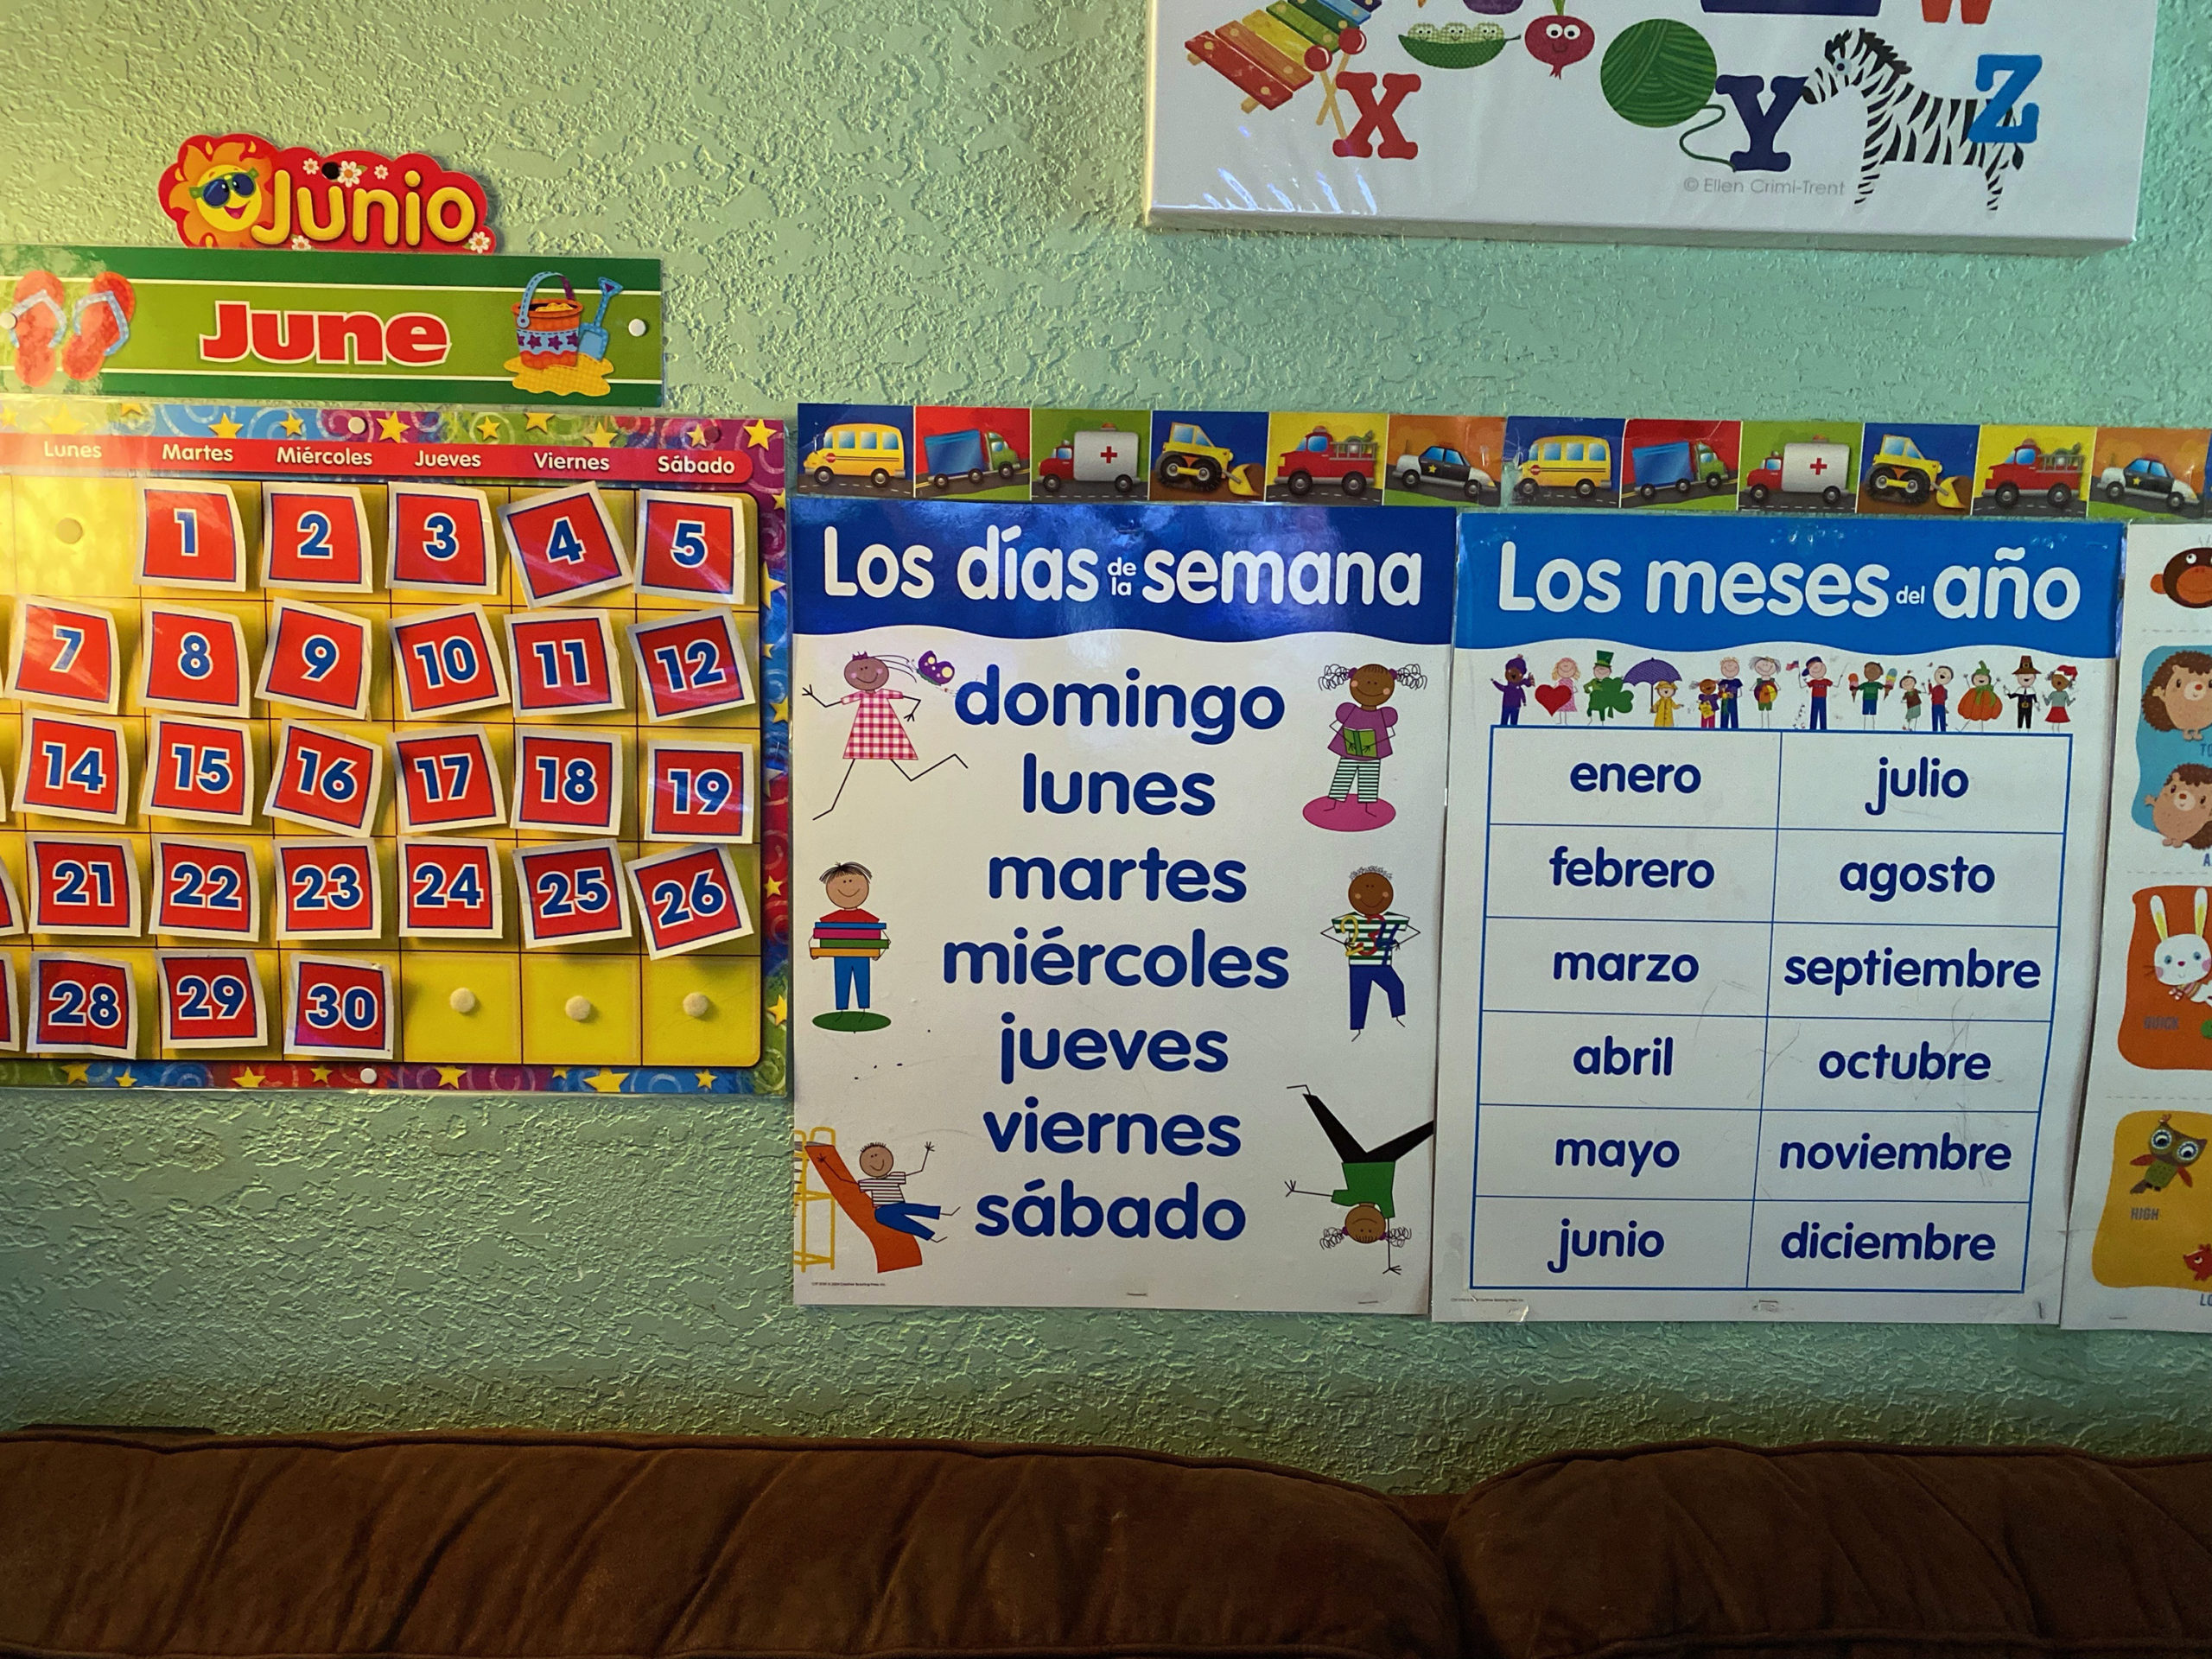 A photo of a poster listing the months of the year in Spanish